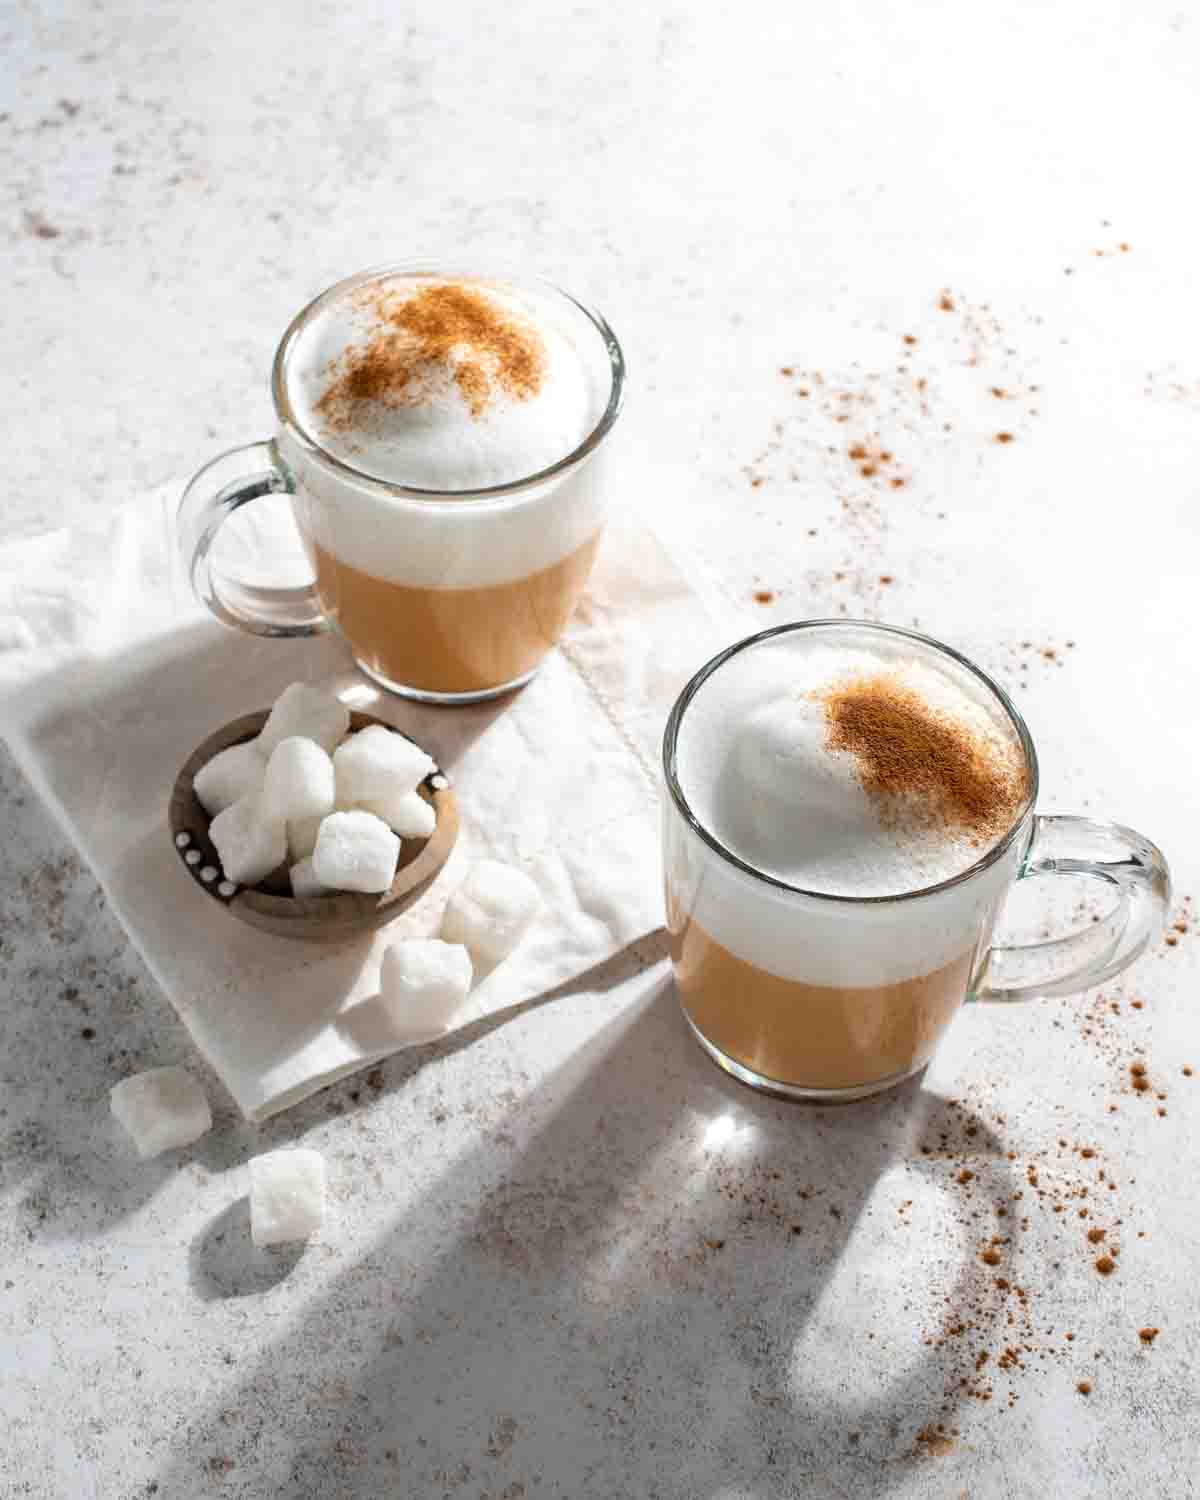 Two mugs of red cappuccino with some sugar cubes in a small bowl.